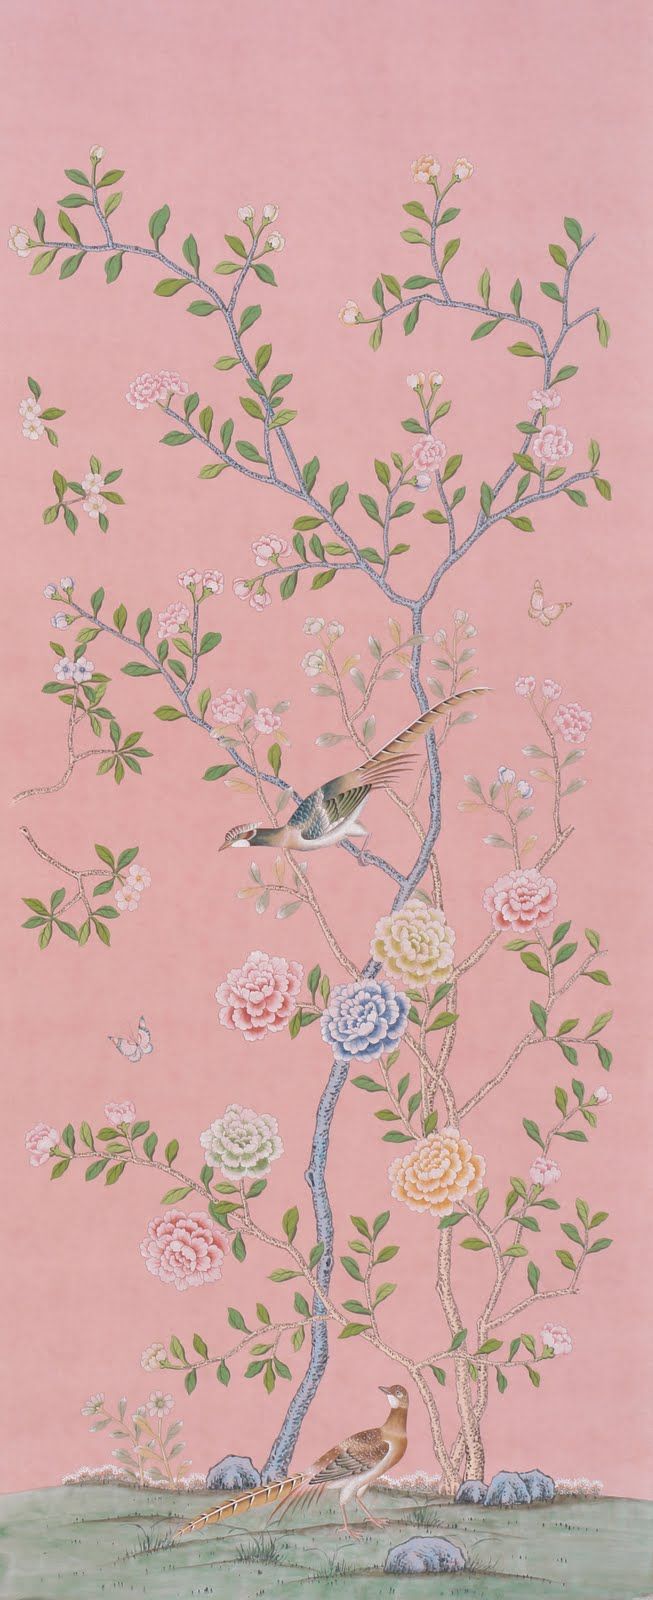 Chinoiserie   de Gournay Wallpaper   hand painted Positively Pretty 653x1600